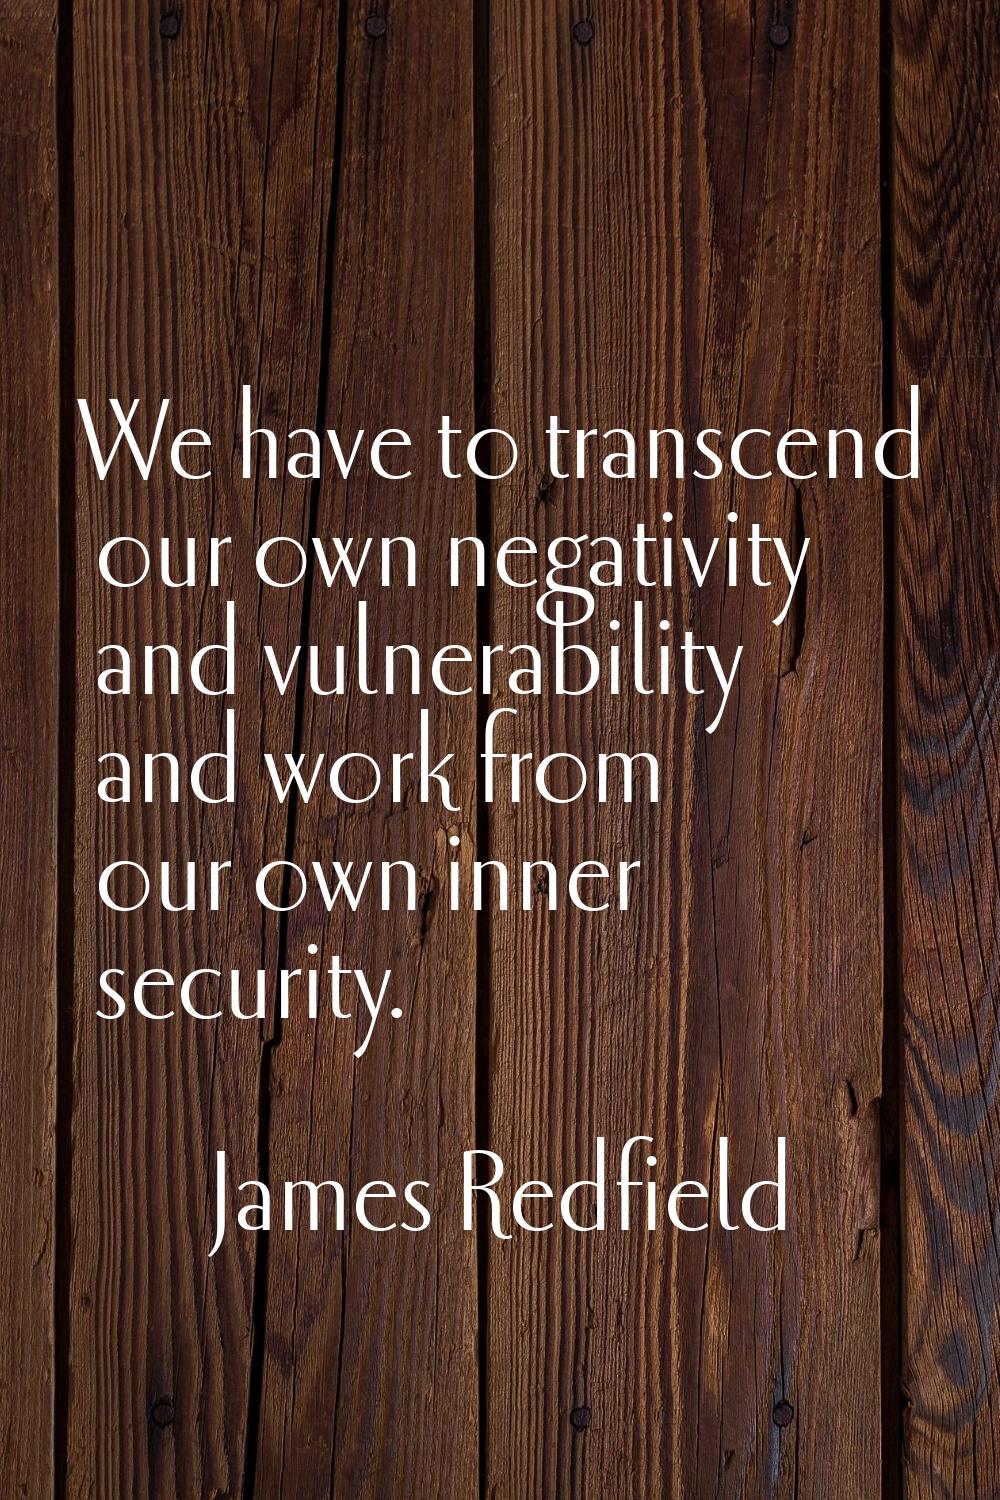 We have to transcend our own negativity and vulnerability and work from our own inner security.